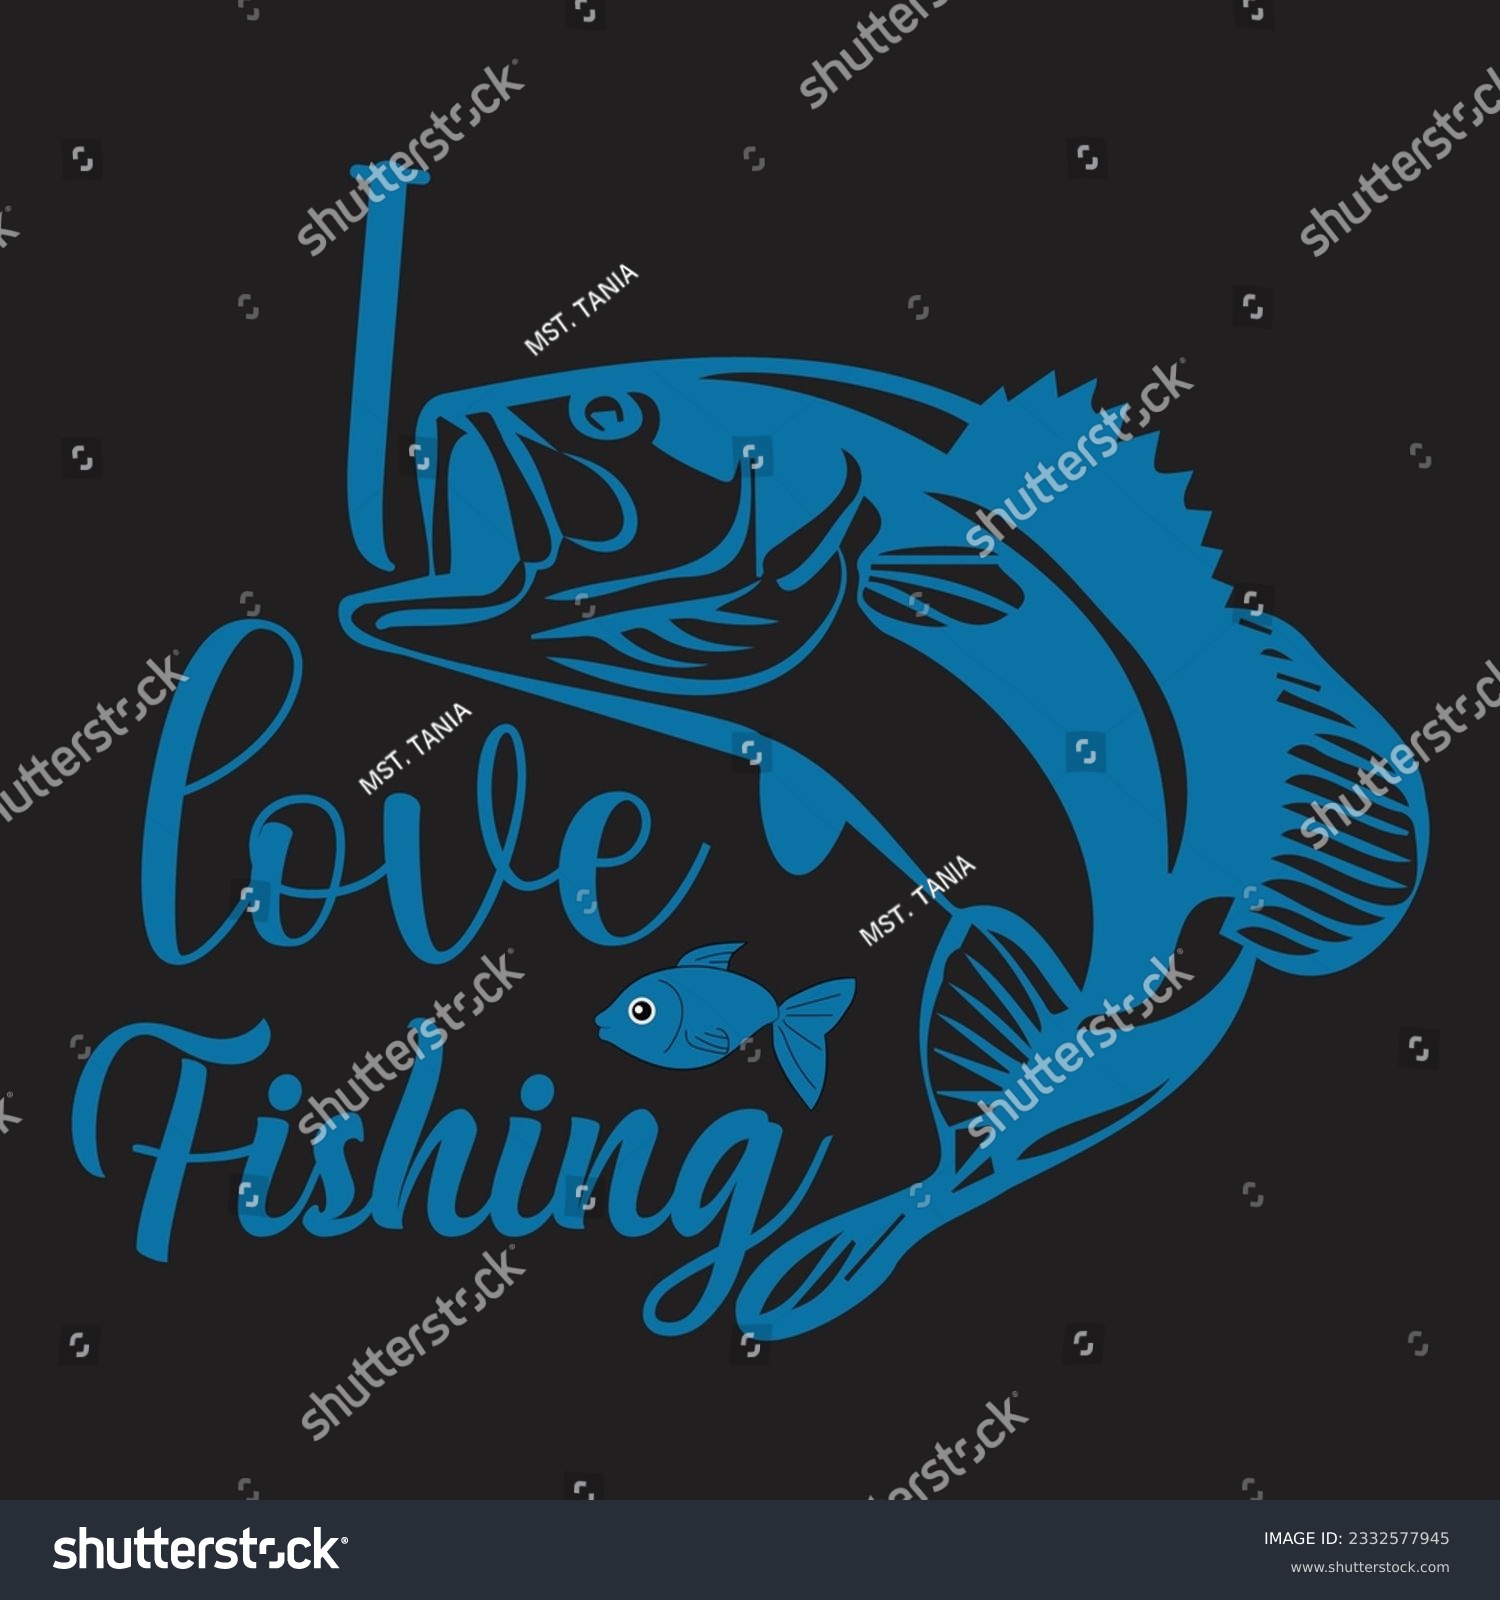 SVG of l love fishing design,fishing svg,life is game svg,hooked for life,eat sleep fish repeat design,like  fishing shirt,i like fishing,fishing is the of my heart beat life,a bad day fishing is beter than. svg